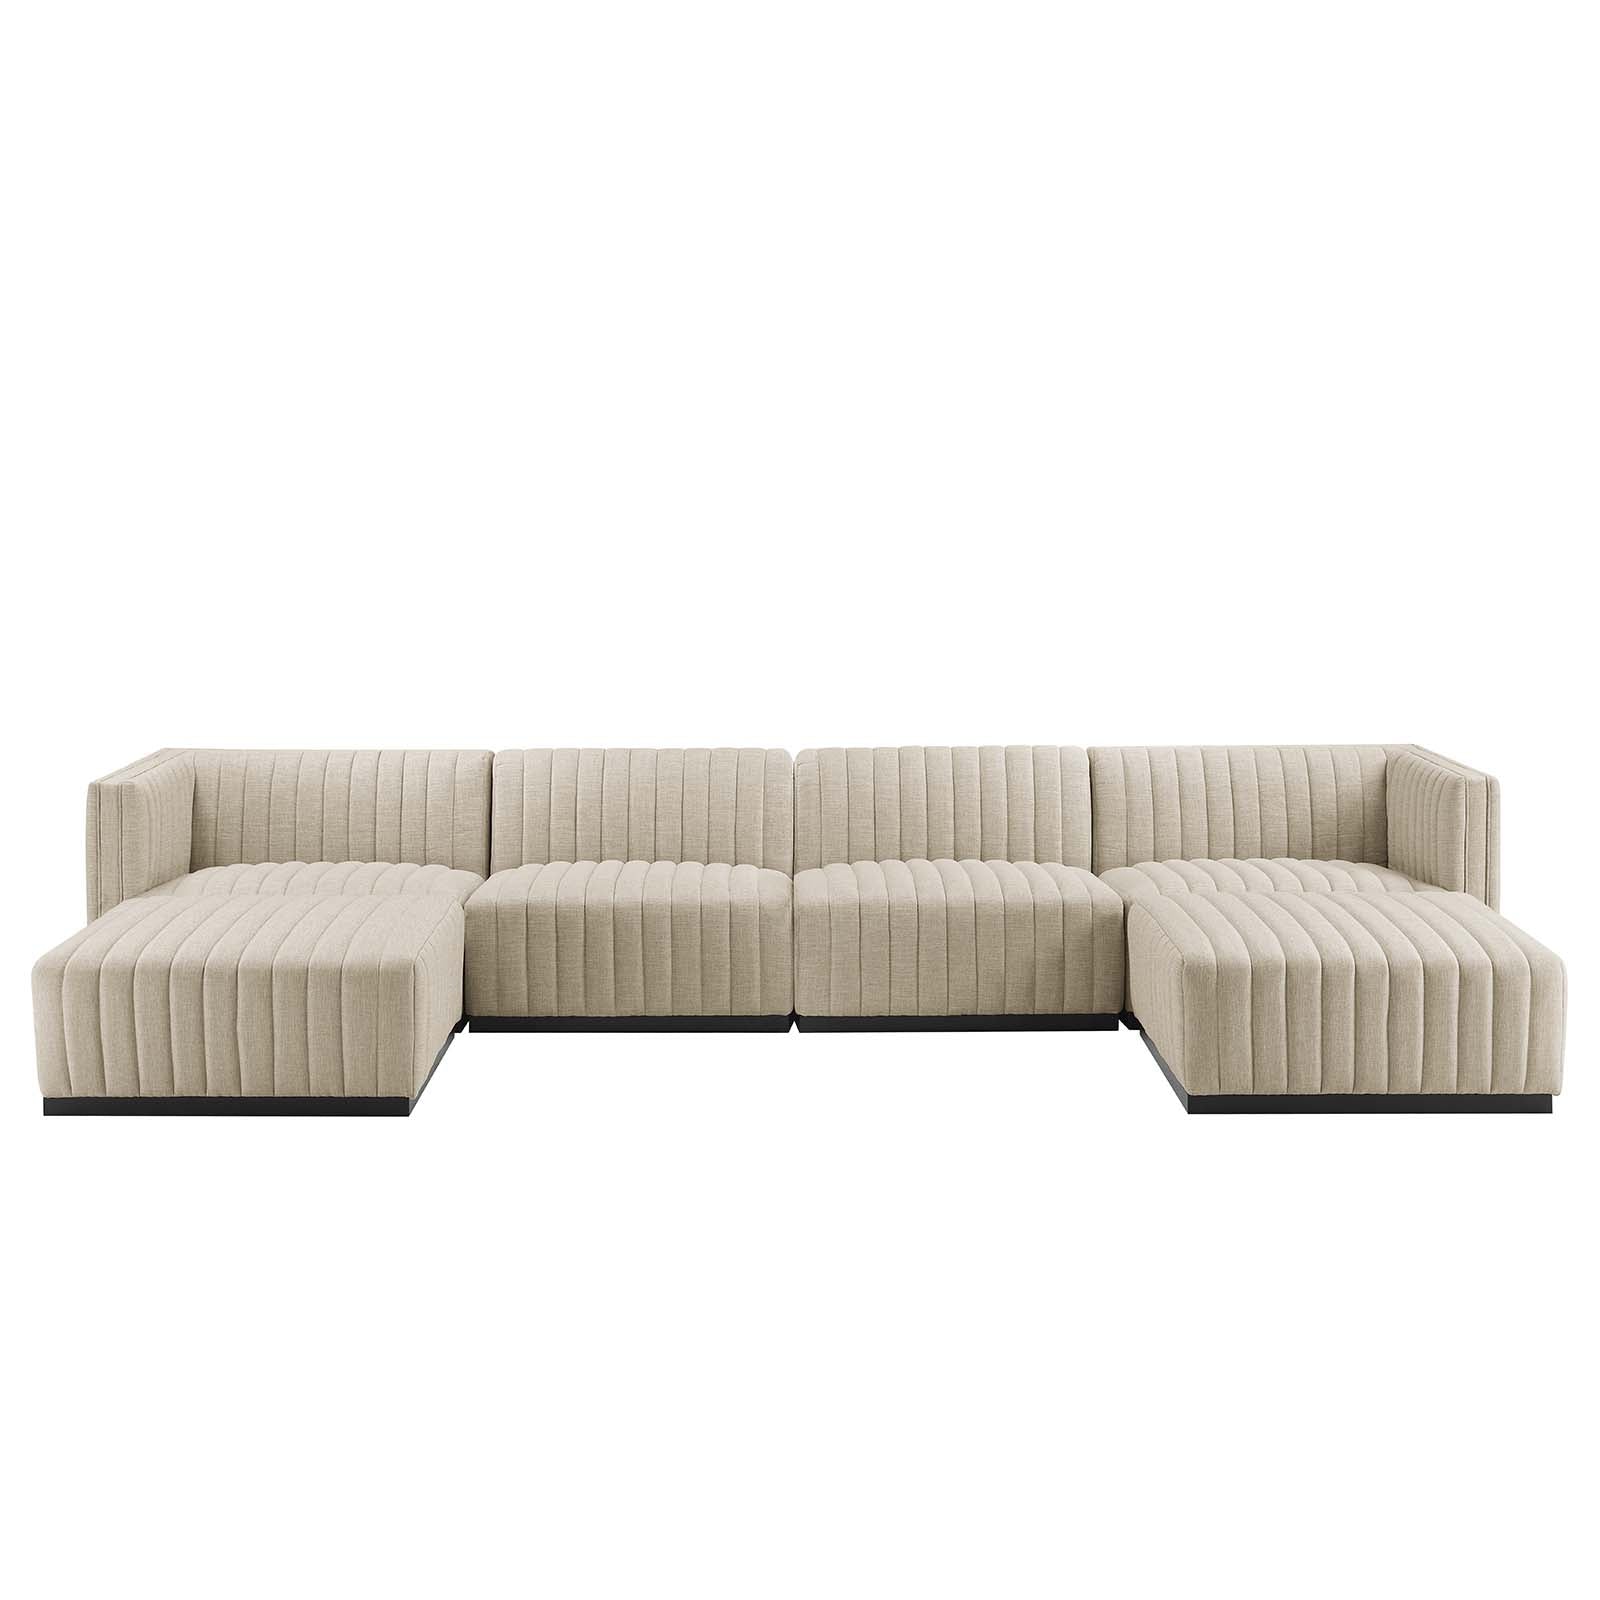 Conjure Channel Tufted Upholstered Fabric 6-Piece Sectional Sofa-Sectional-Modway-Wall2Wall Furnishings